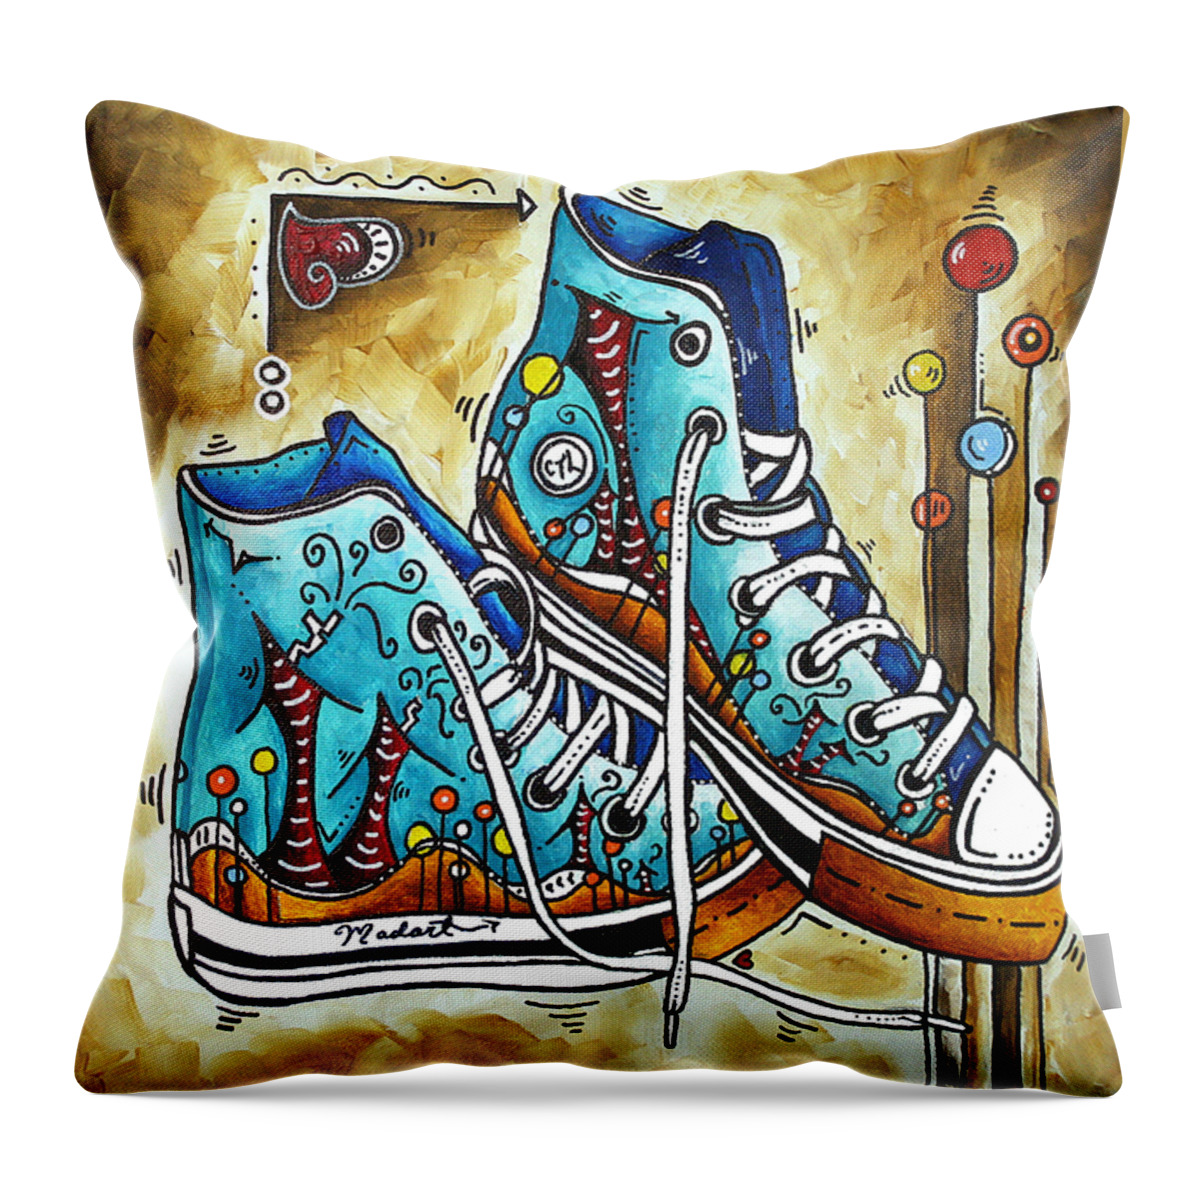 Original Throw Pillow featuring the painting Whimsical Shoes by MADART by Megan Aroon